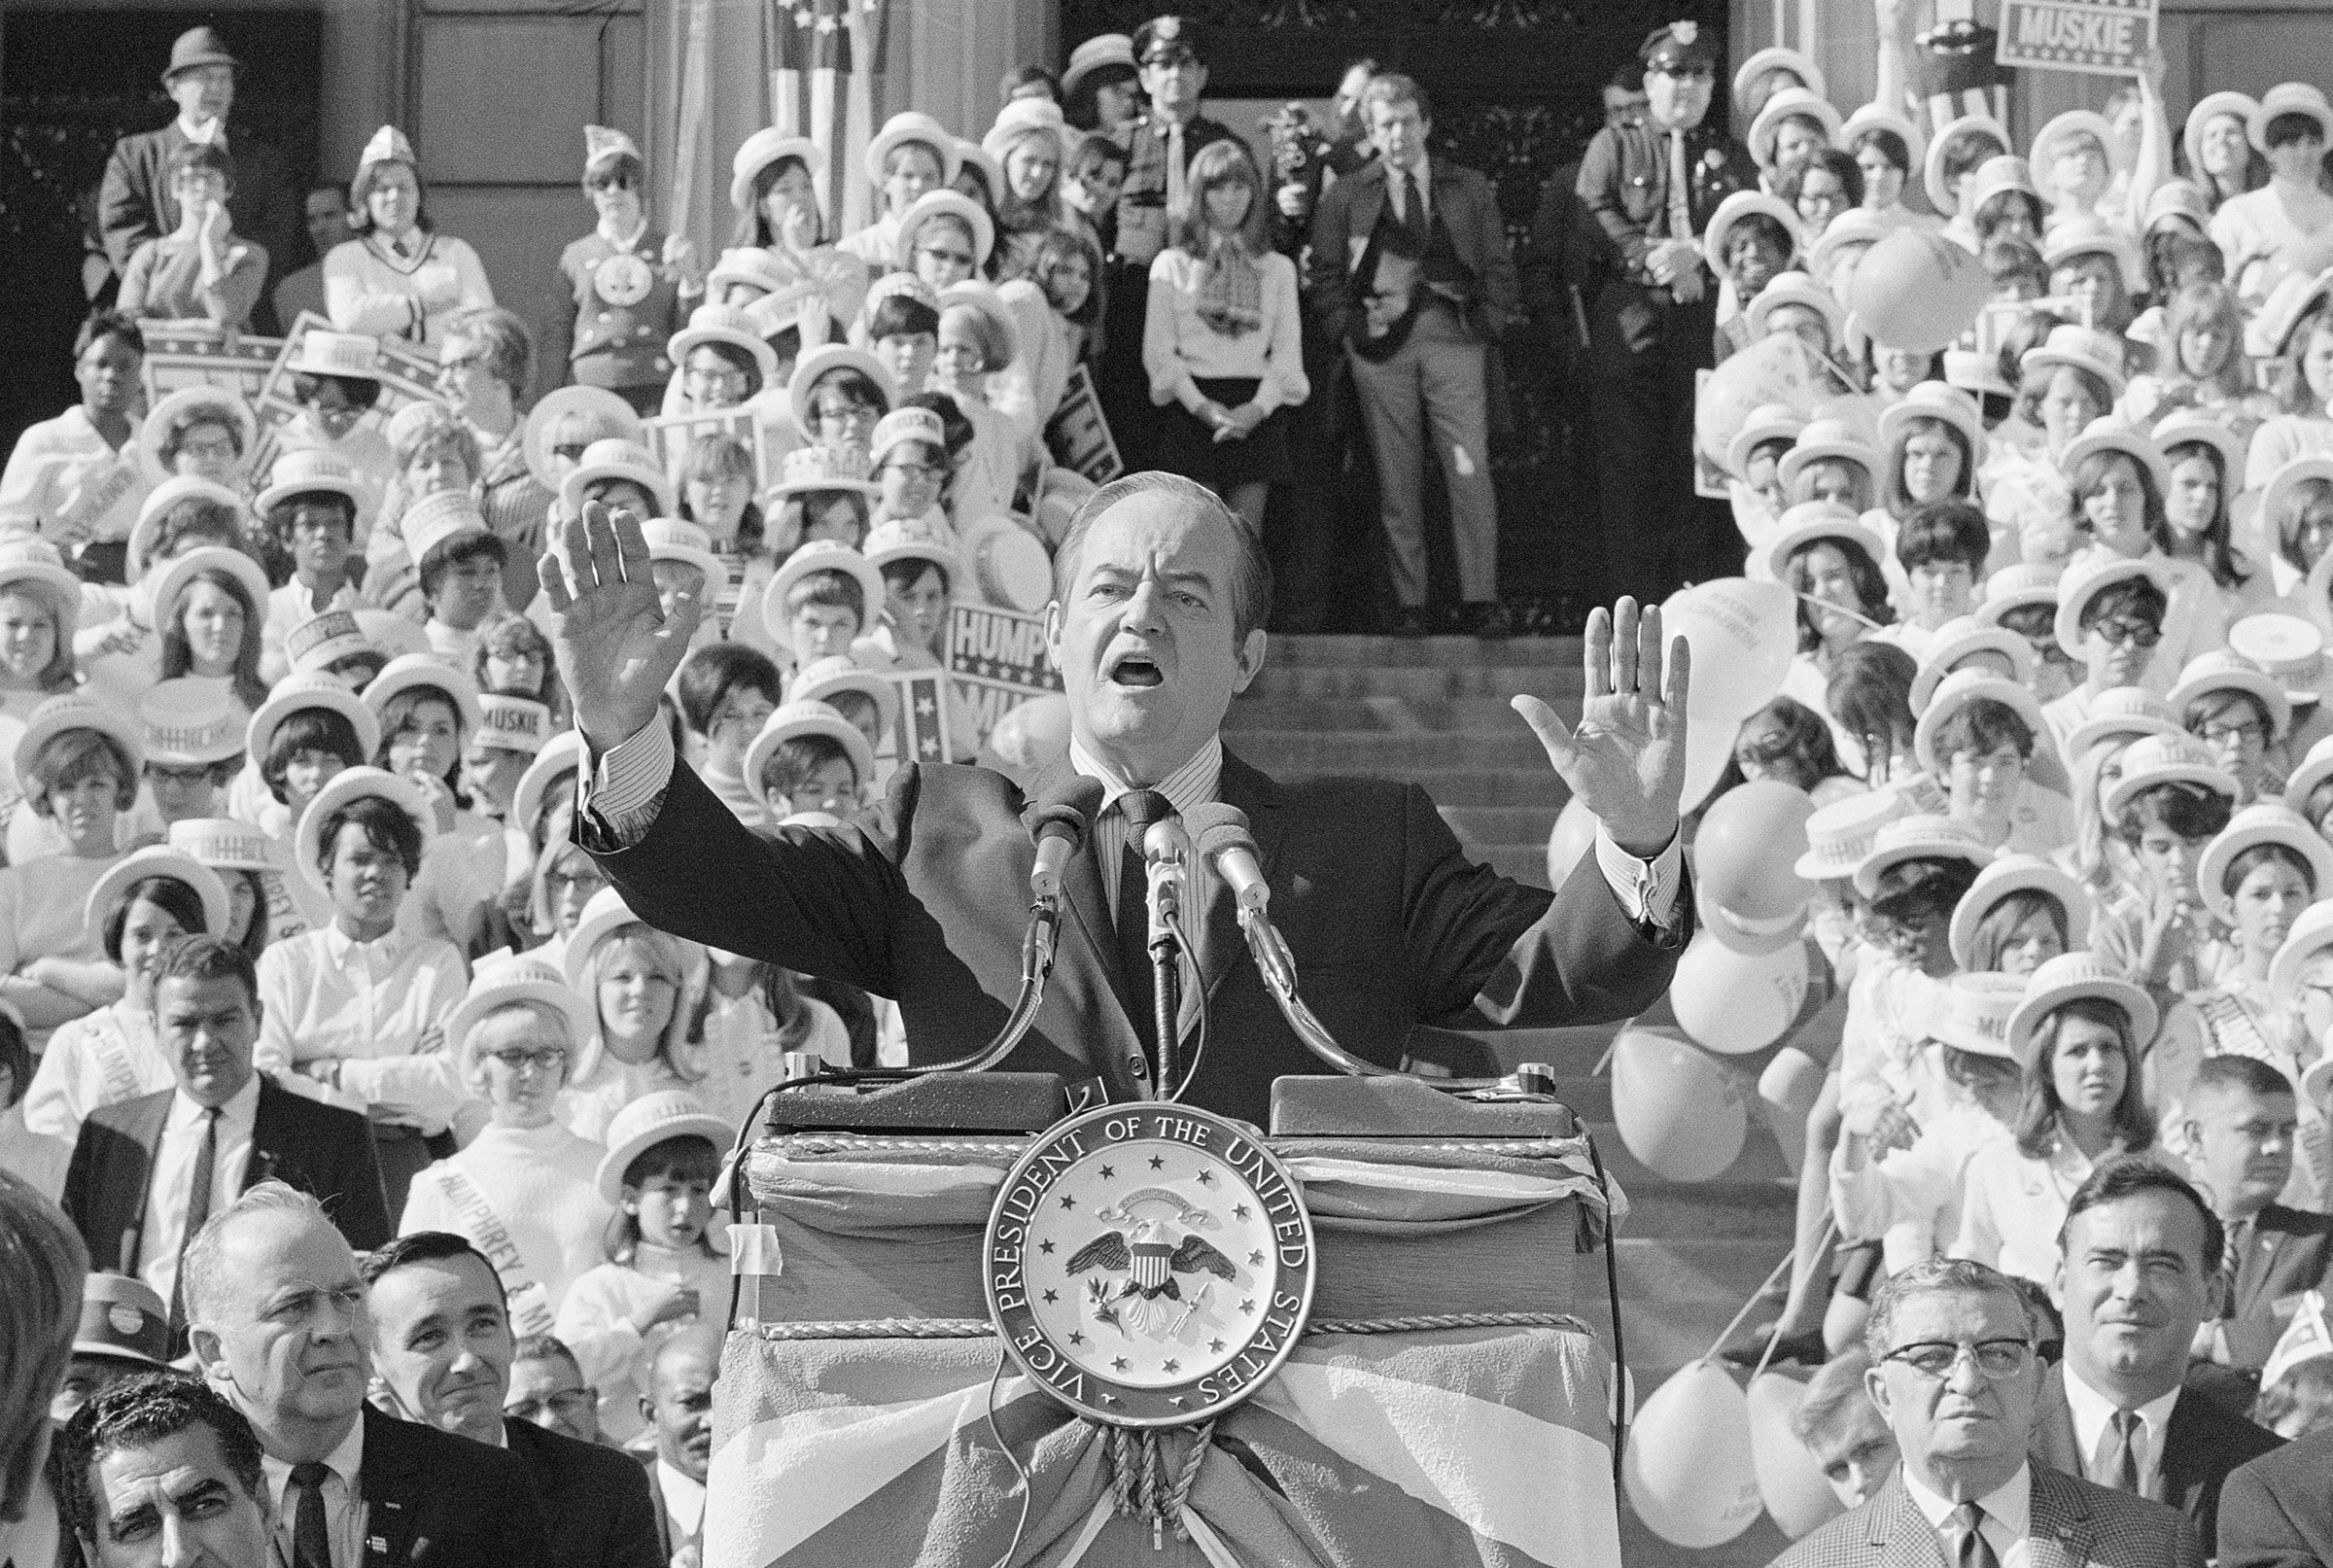 Hubert Humphrey, Vice President under Lyndon Johnson, makes a speech during an unsuccessful attempt at the presidency in 1968. (Wally McNamee—CORBIS/Corbis/Getty Images)